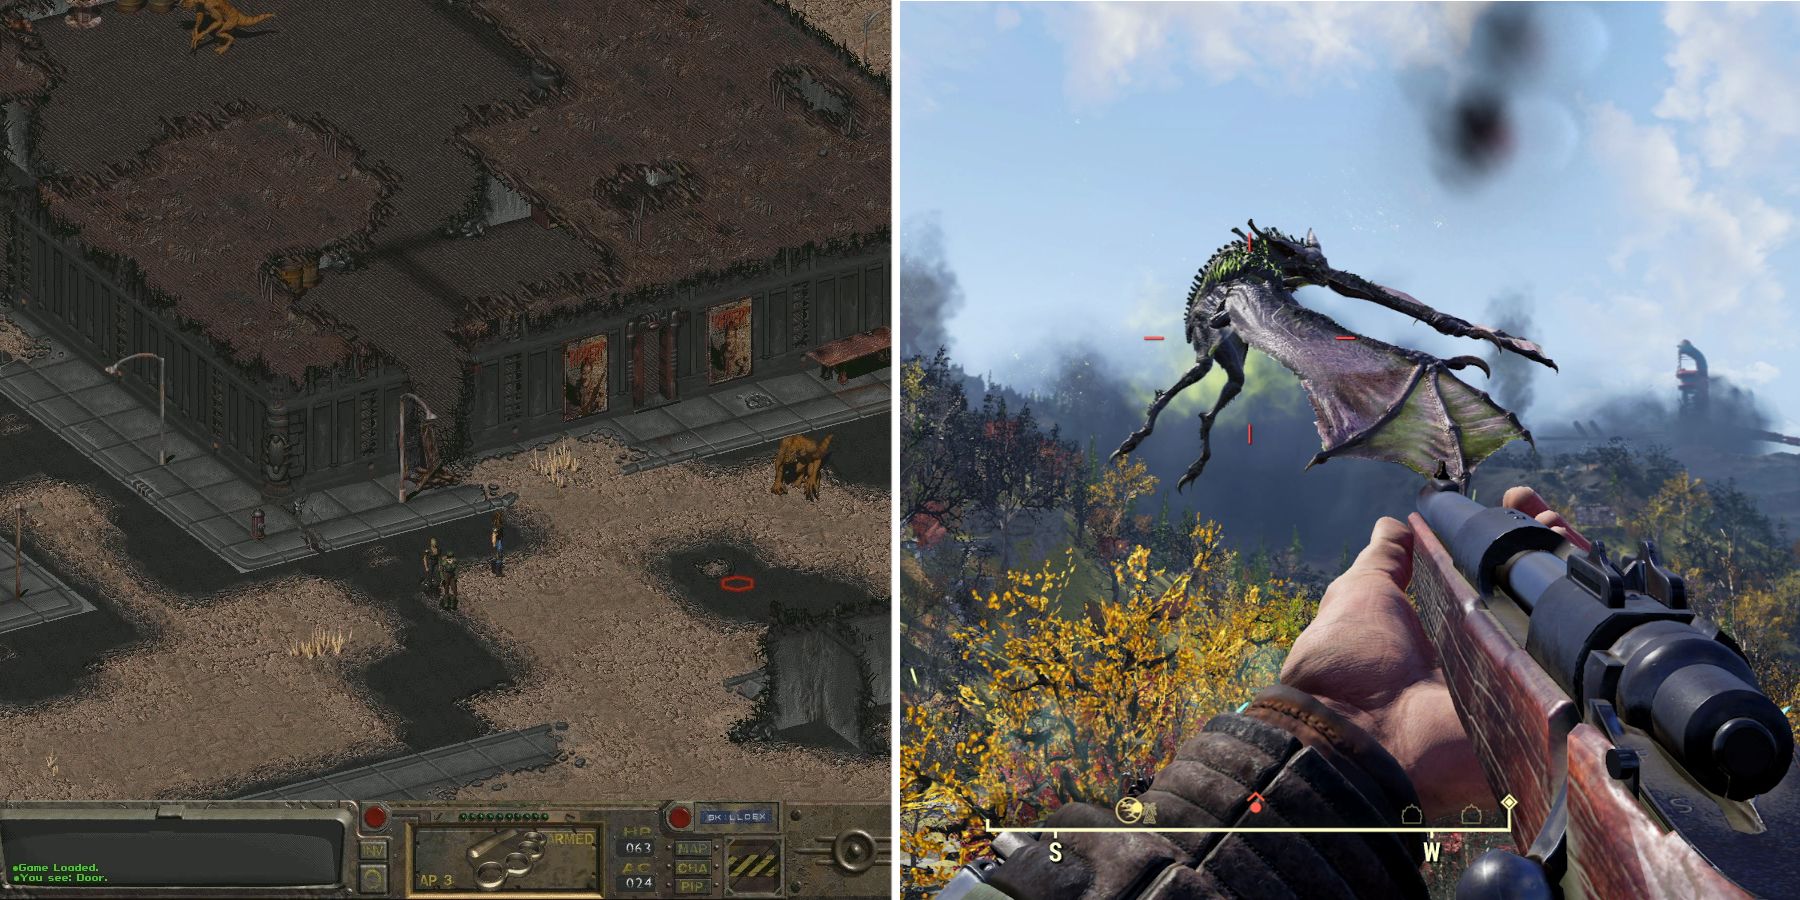 Exploring the world of Fallout 1 and 76